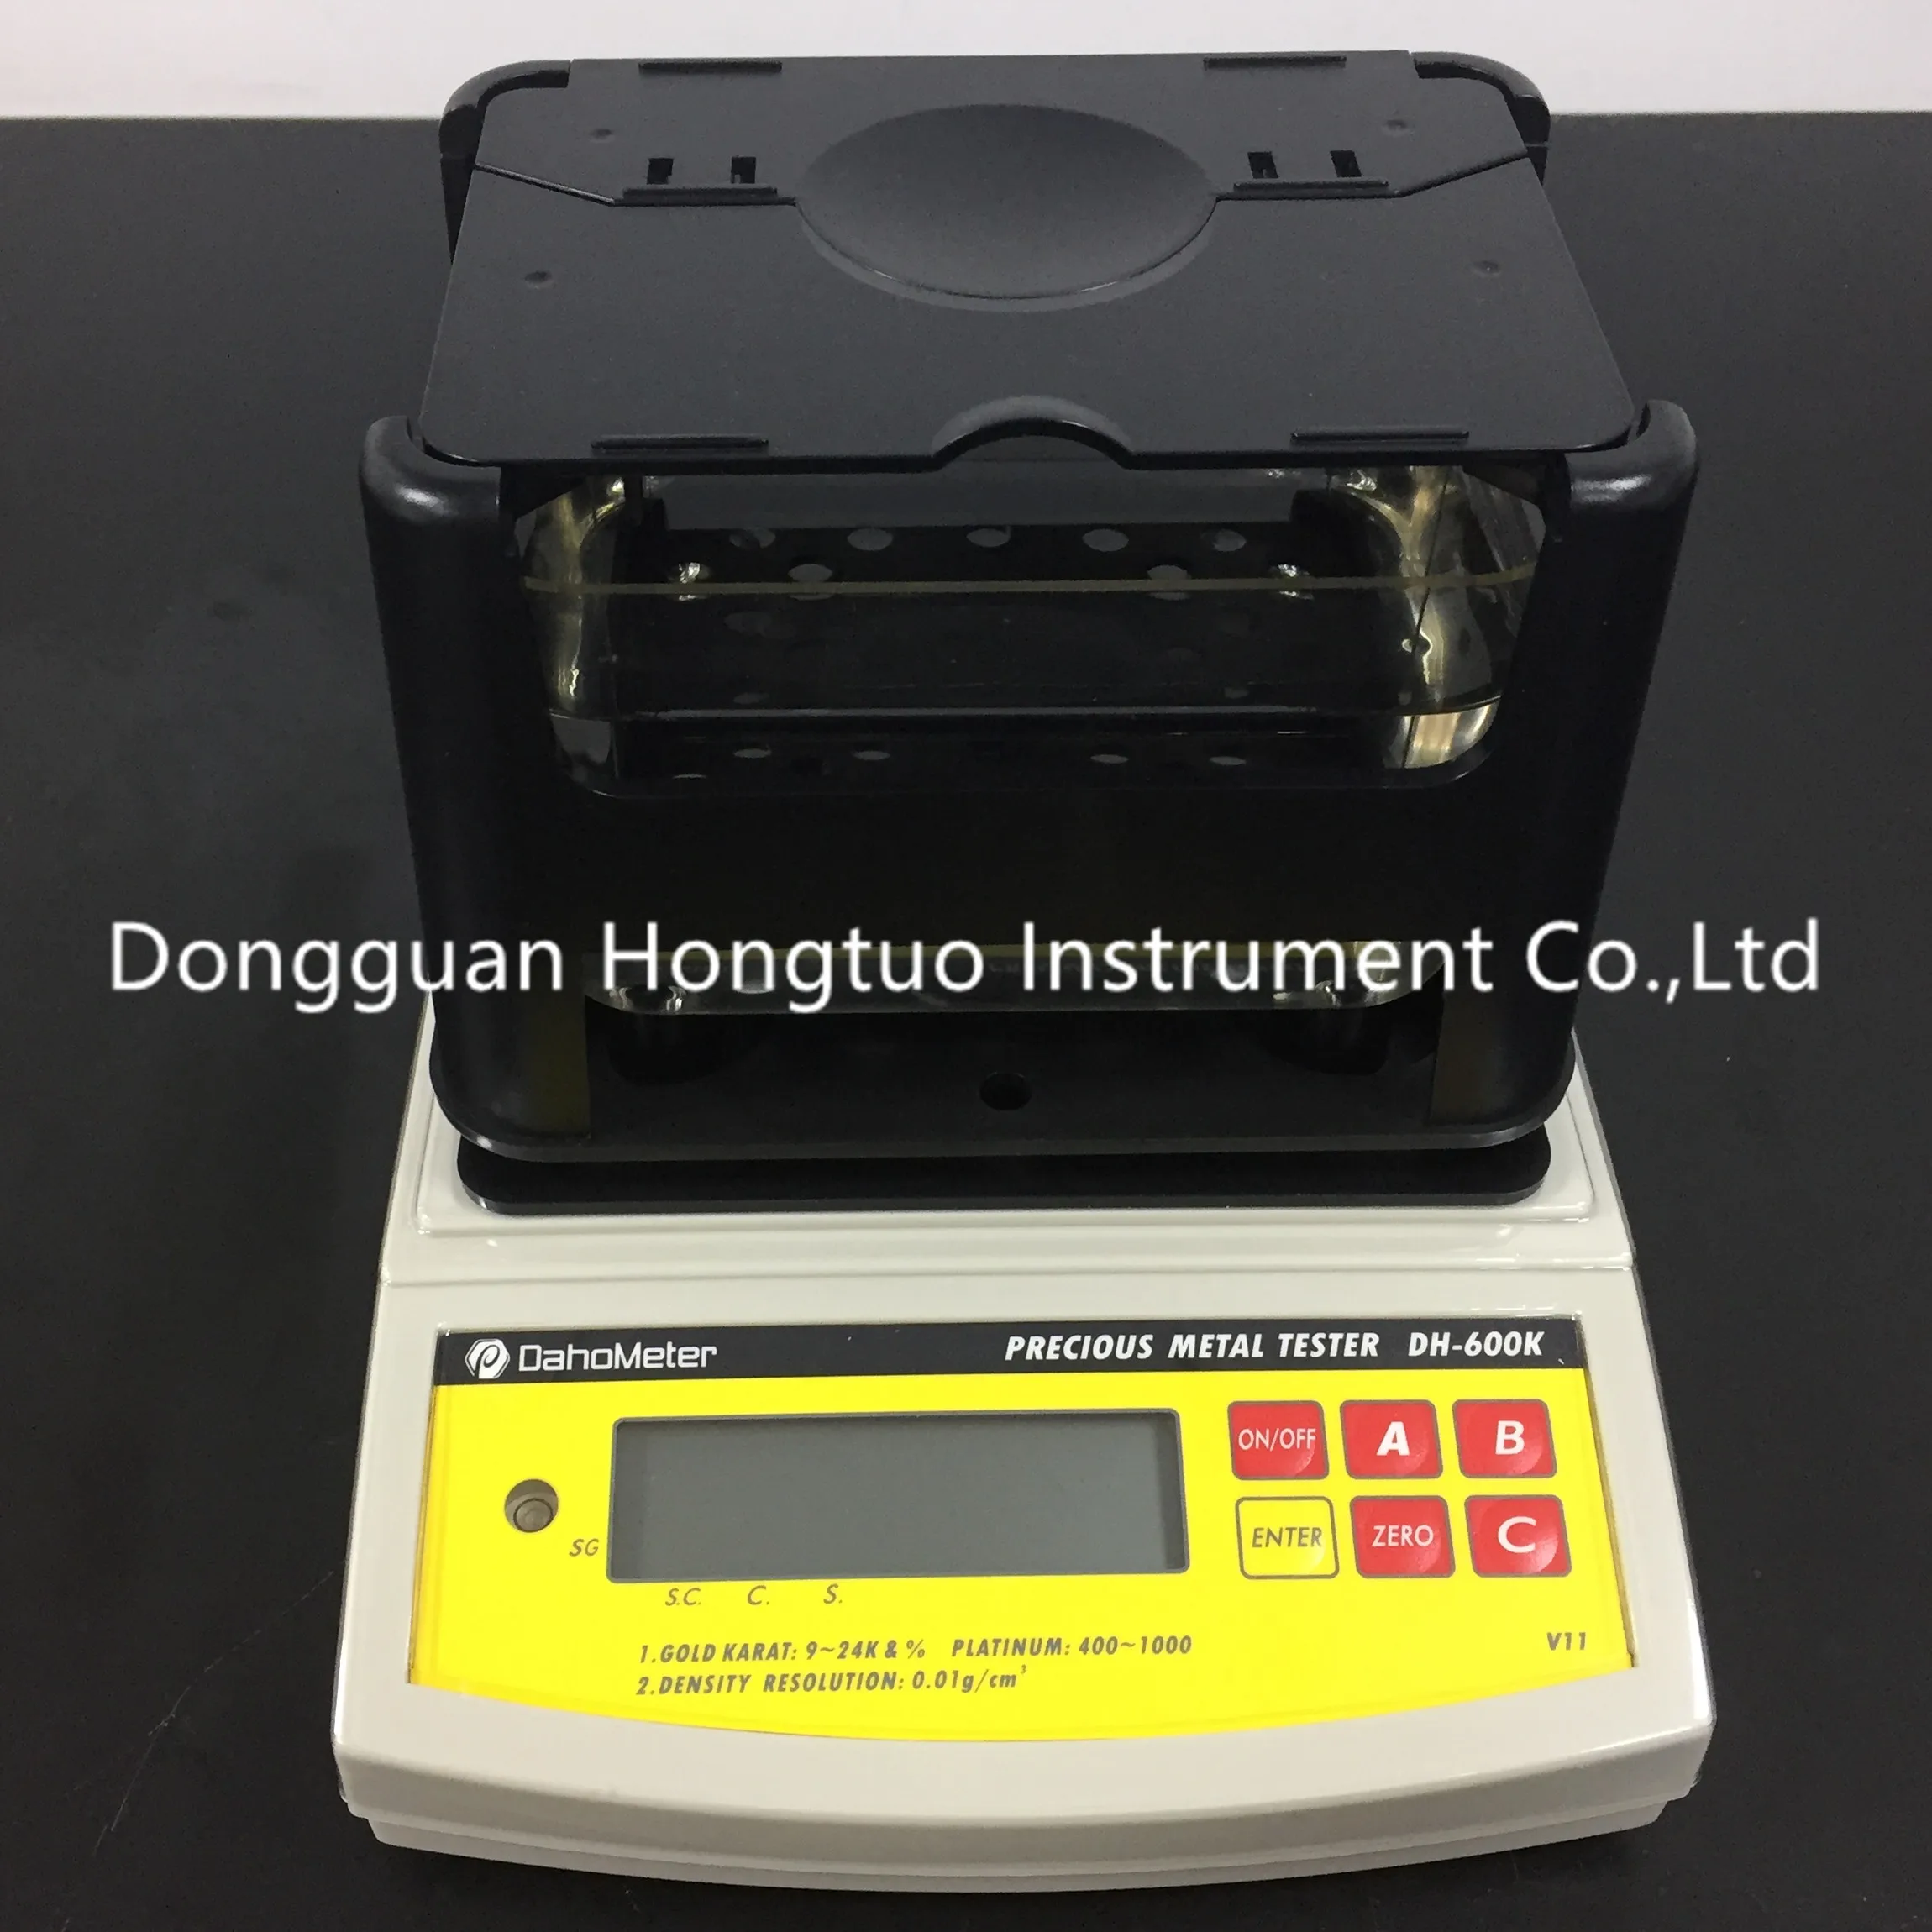 

DH-600K 0.001g/cm3 Density Resolution Gold Purity Testing Machine With Gold Karat Meter Precious Metal Purity Tester